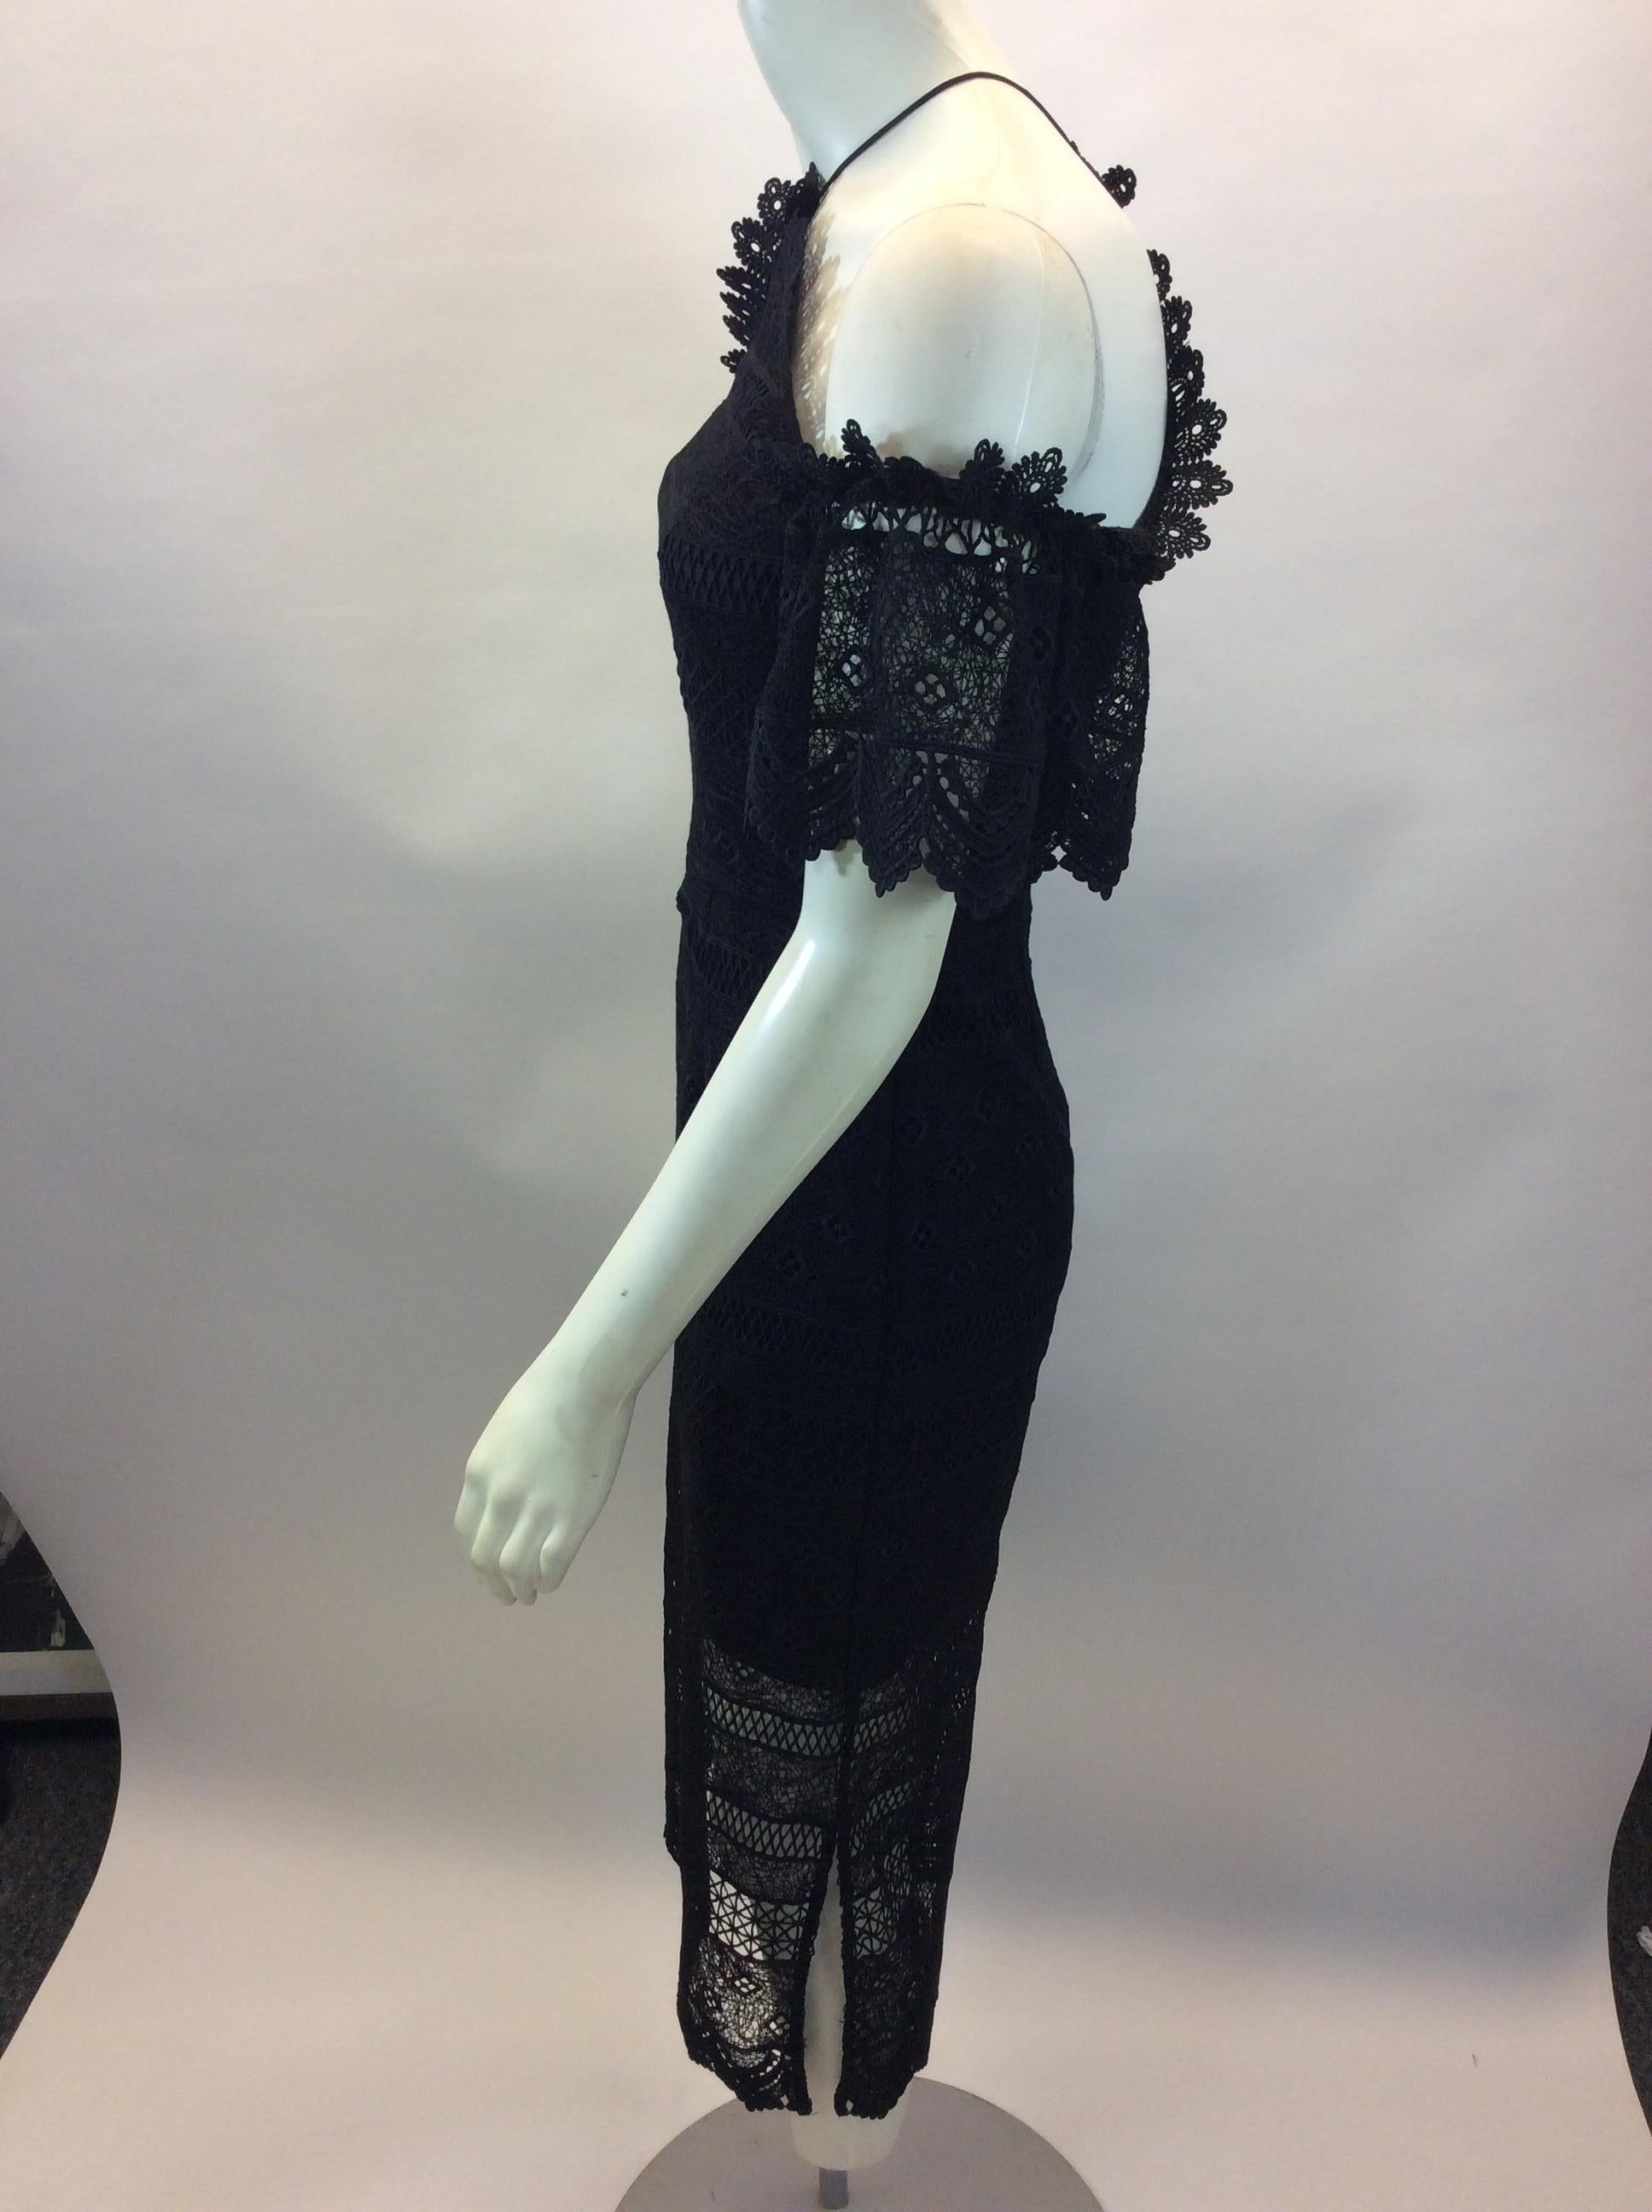 Amur Black Lace Dress
$425
Made in China
100% Polyester
Size 0
Length 45